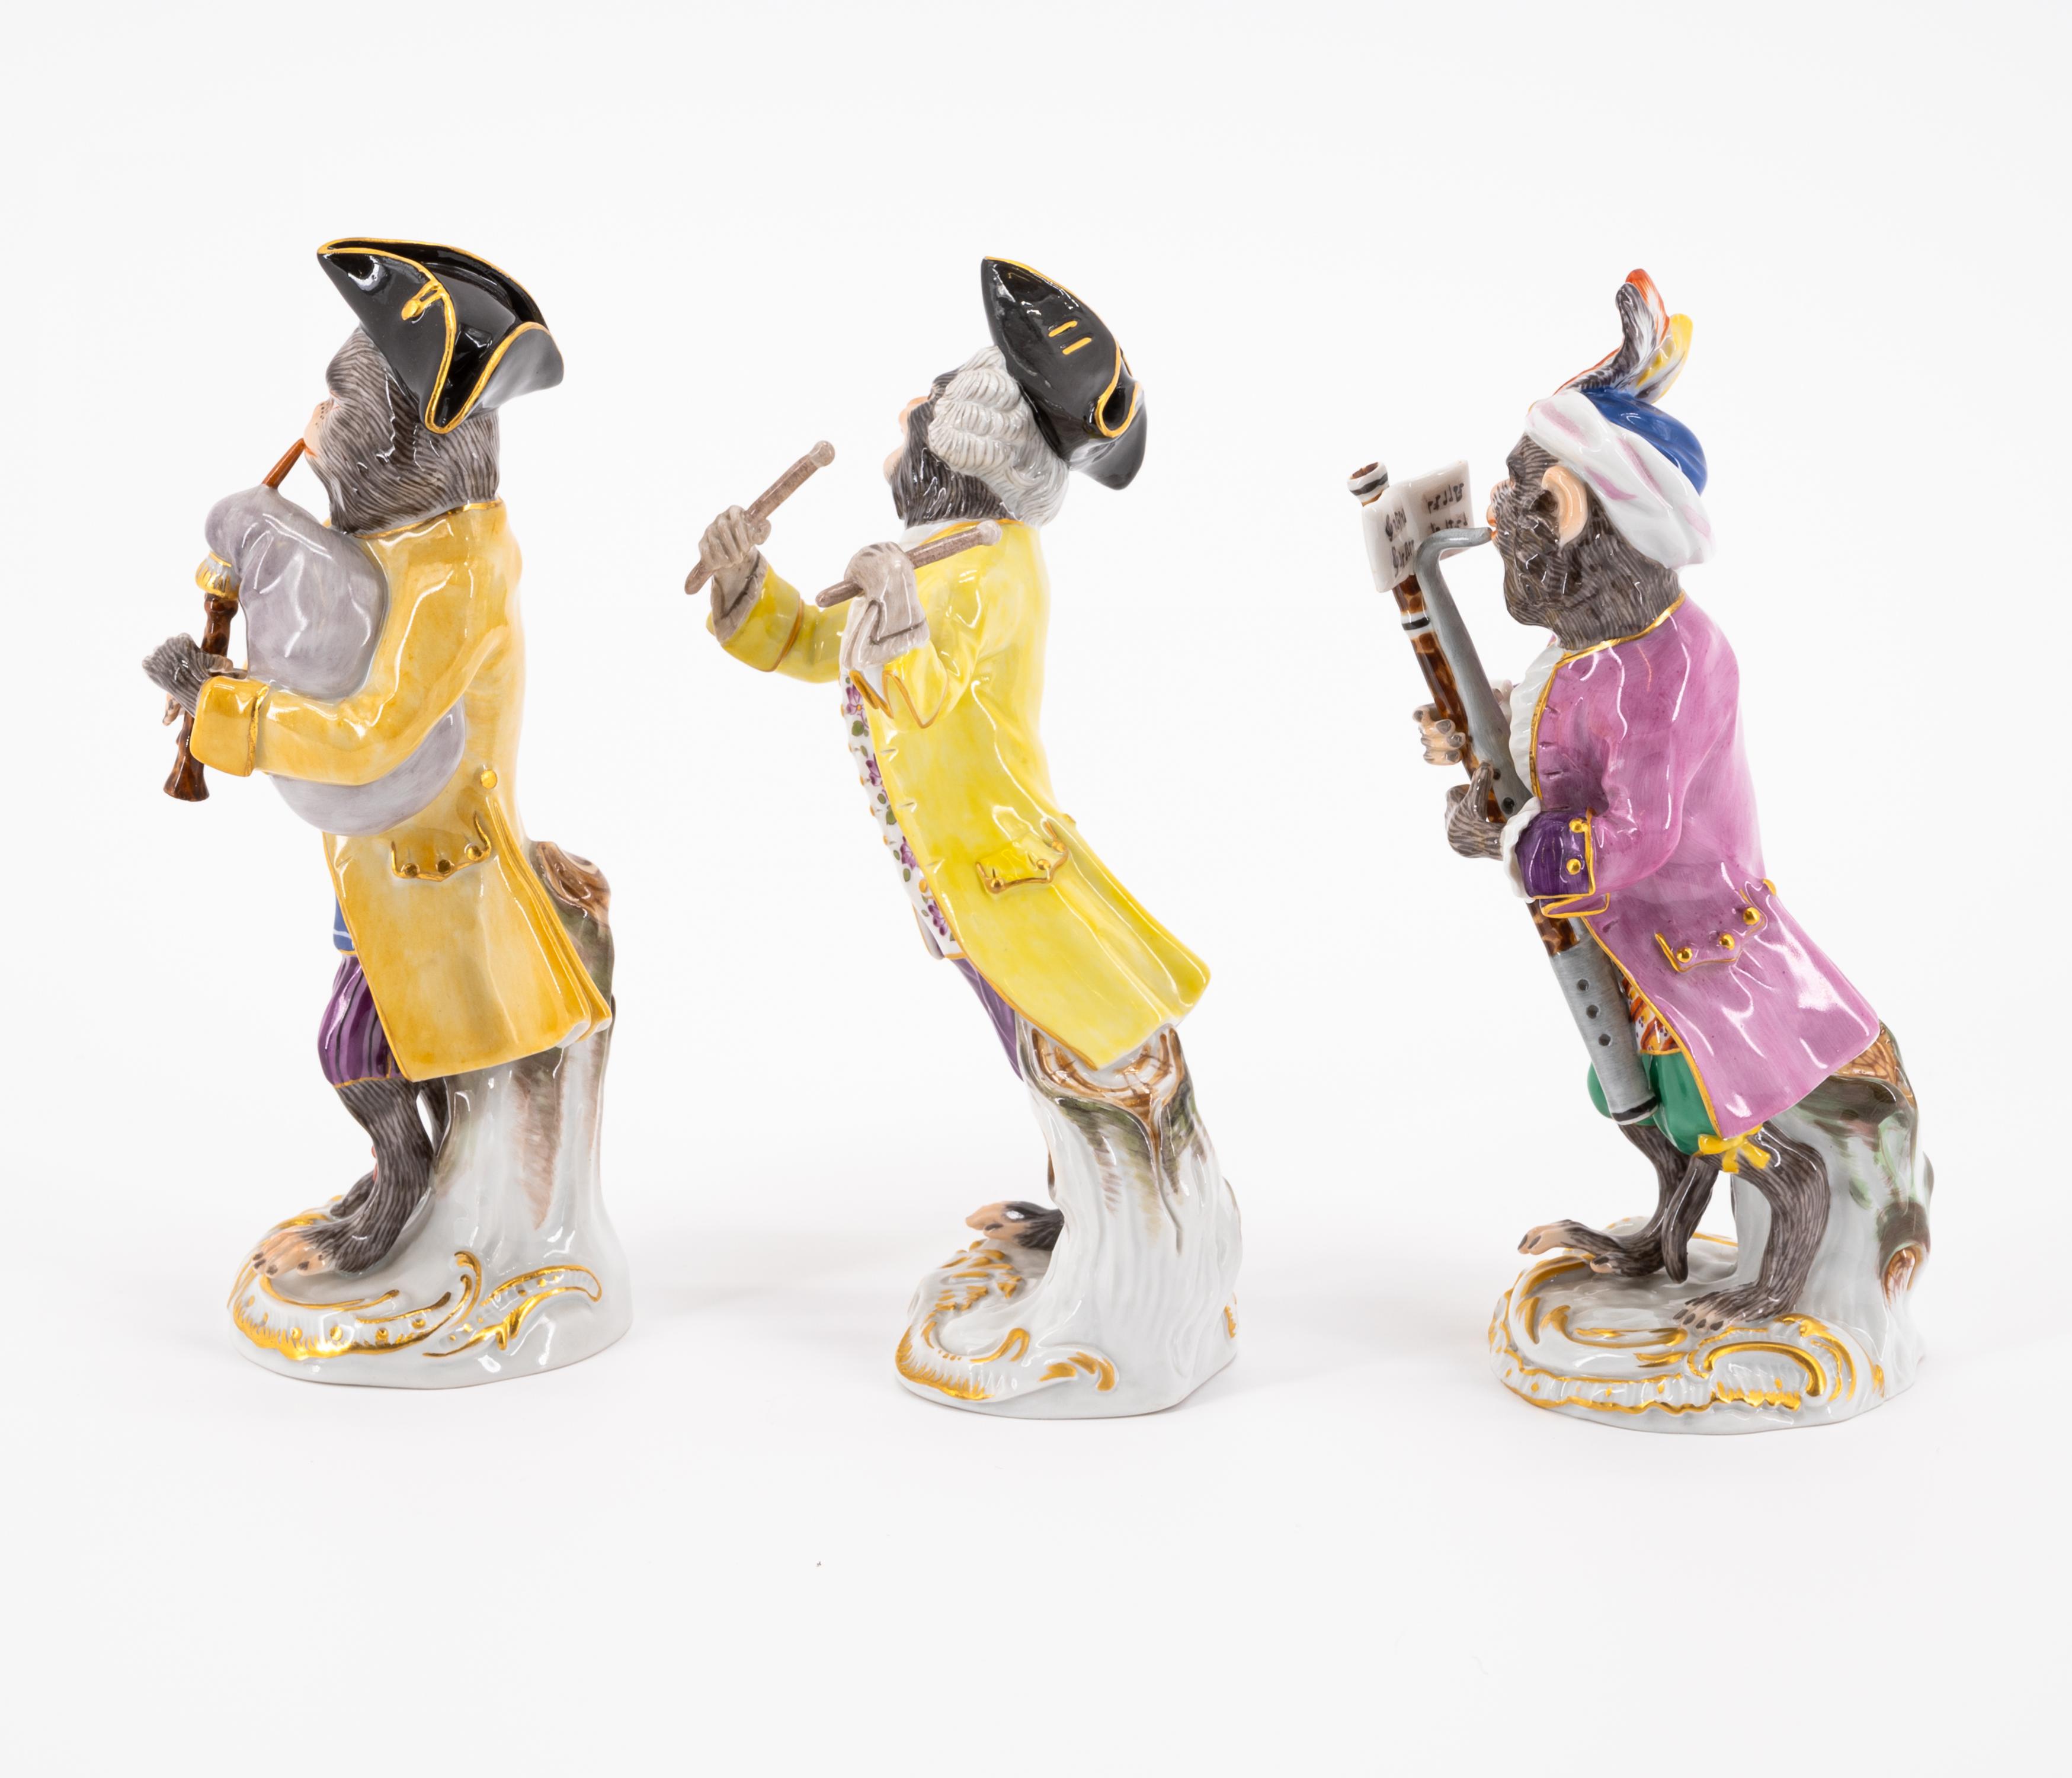 21 PORCELAIN FIGURES FROM THE MONKEY CHAPEL - Image 19 of 27